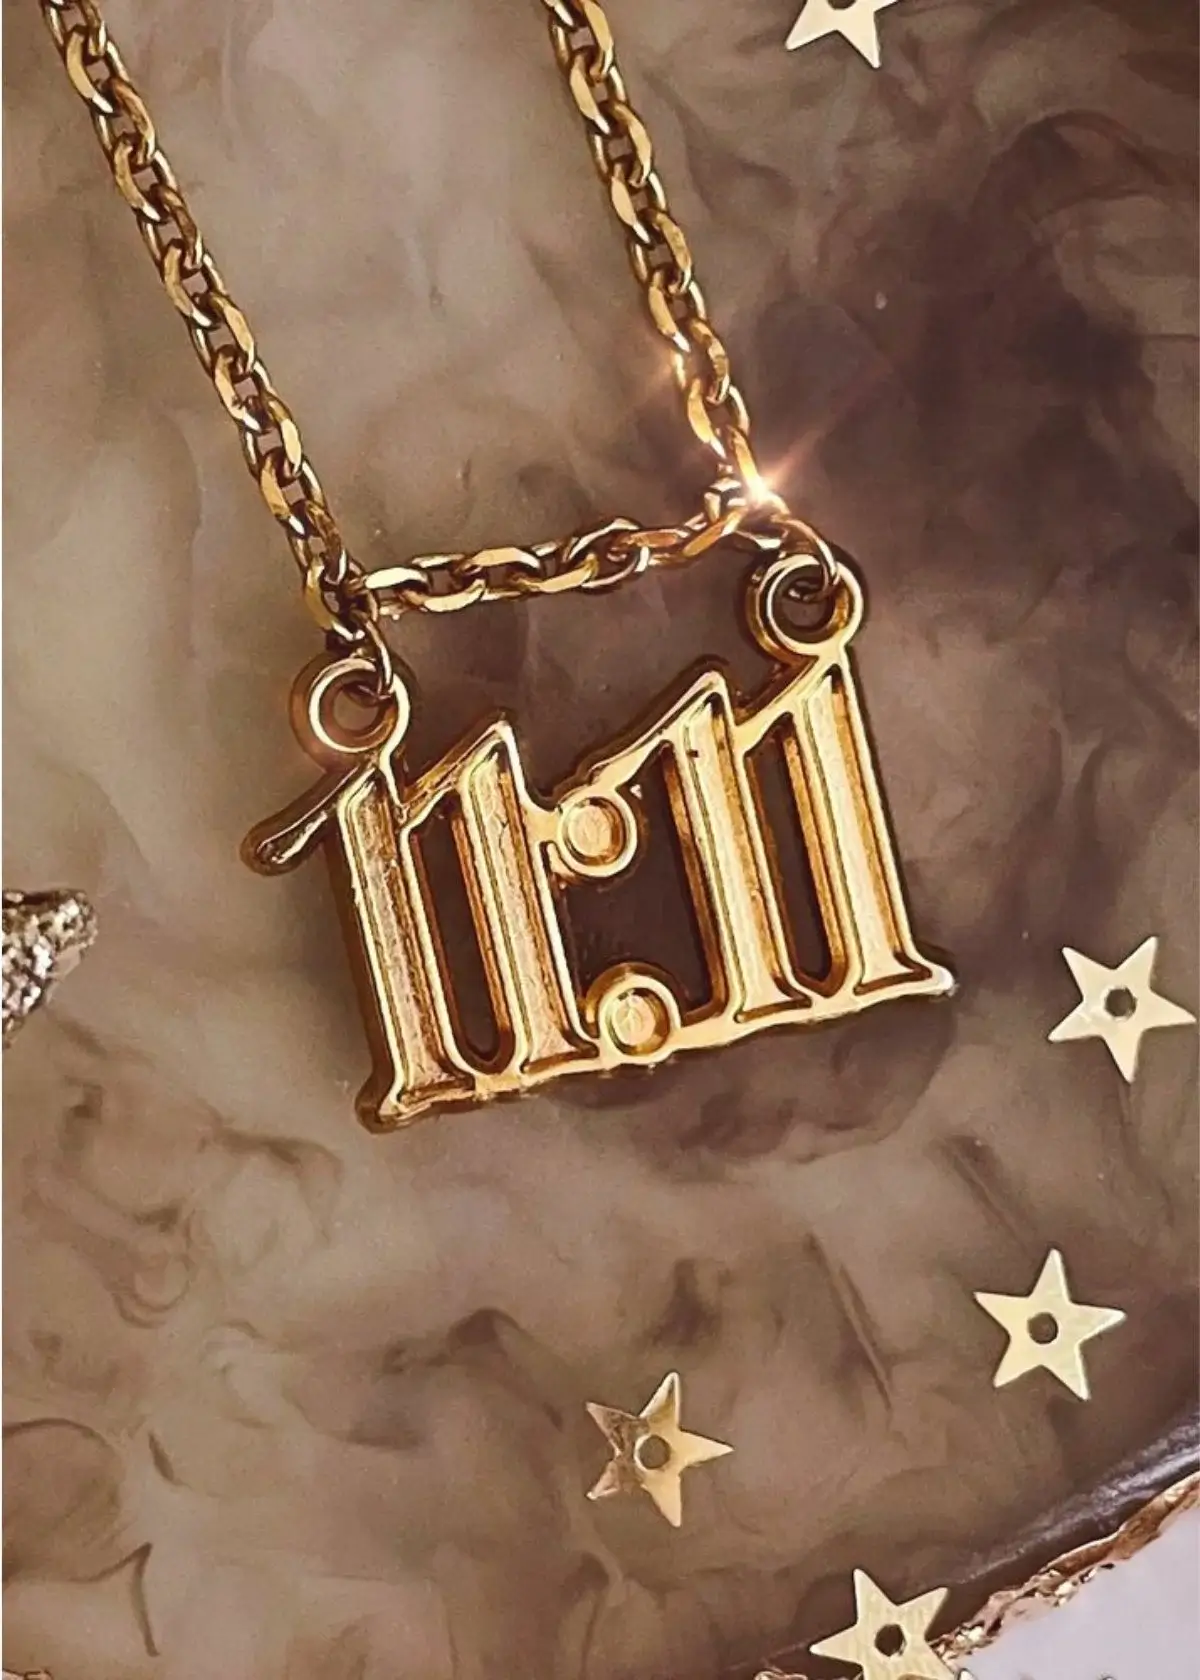 What is an 11 11 necklace?